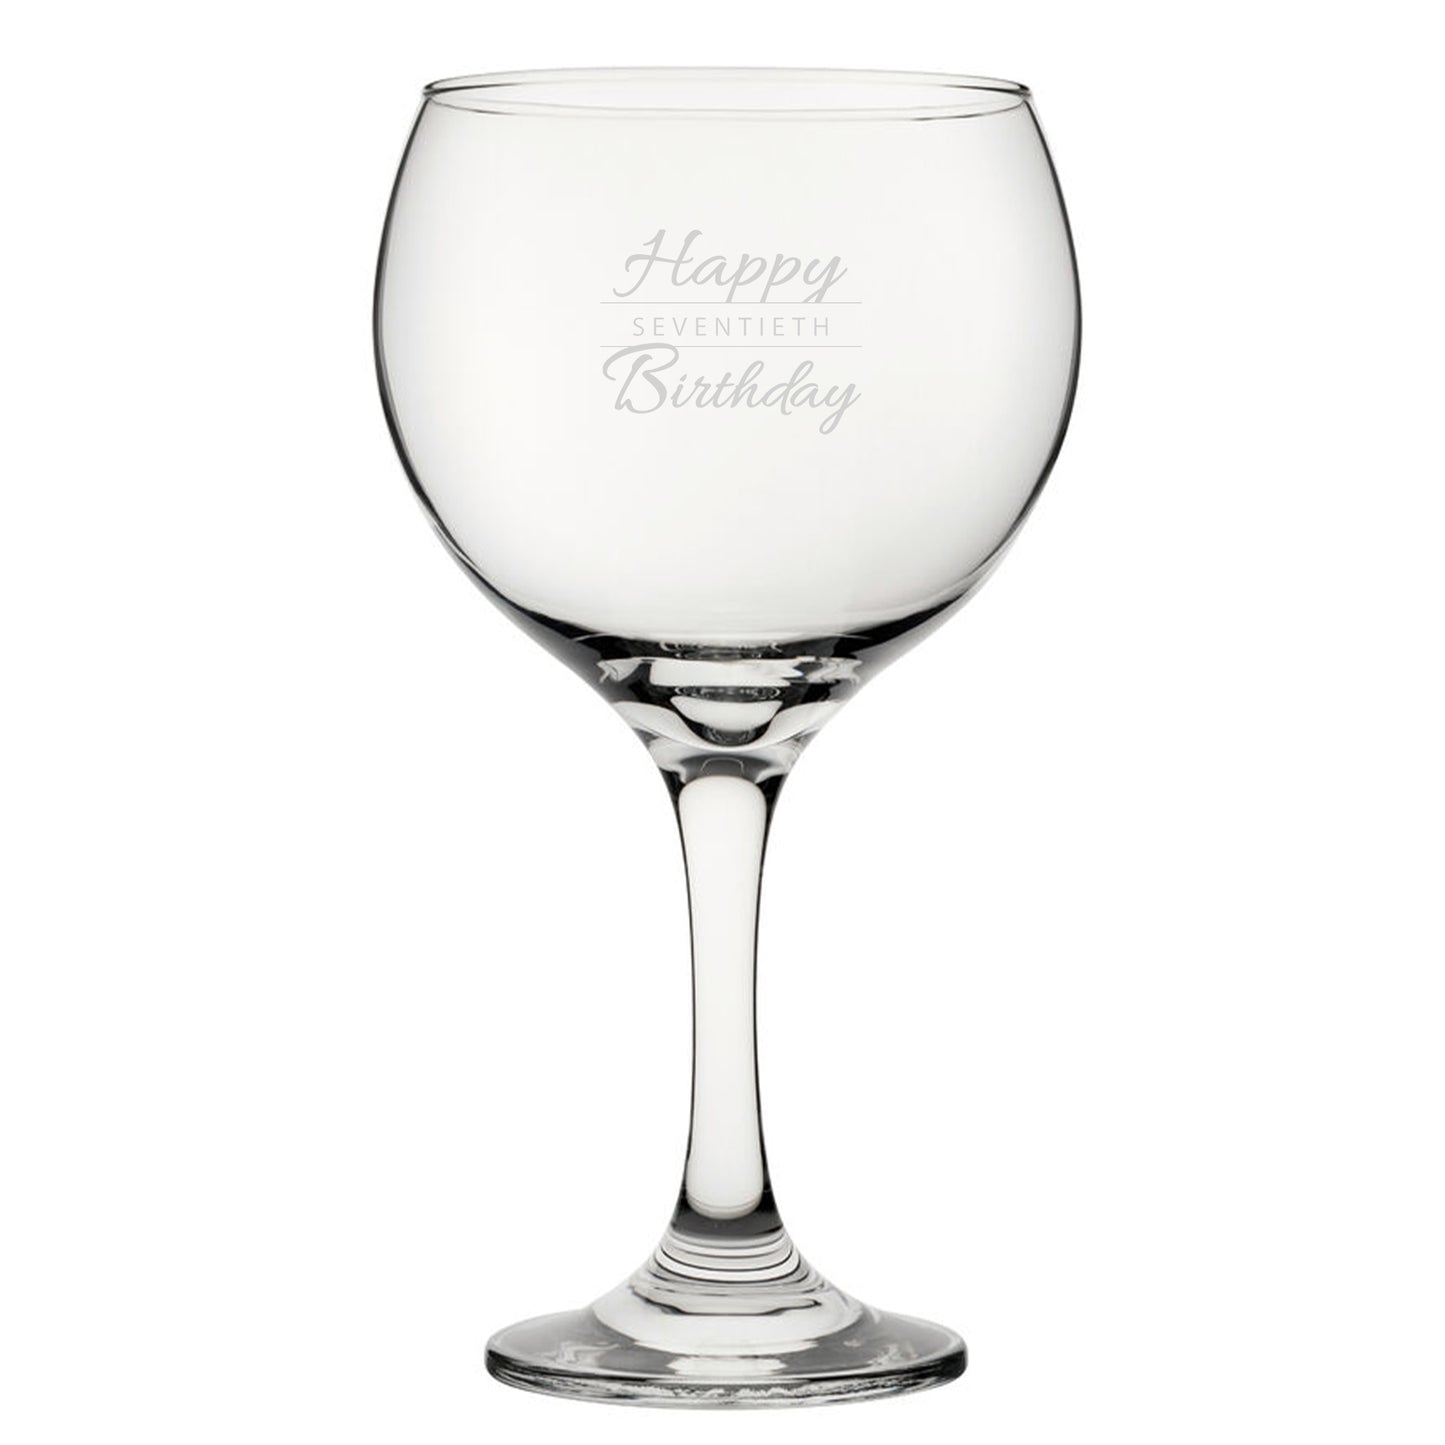 Happy 70th Birthday Modern Design - Engraved Novelty Gin Balloon Cocktail Glass Image 2